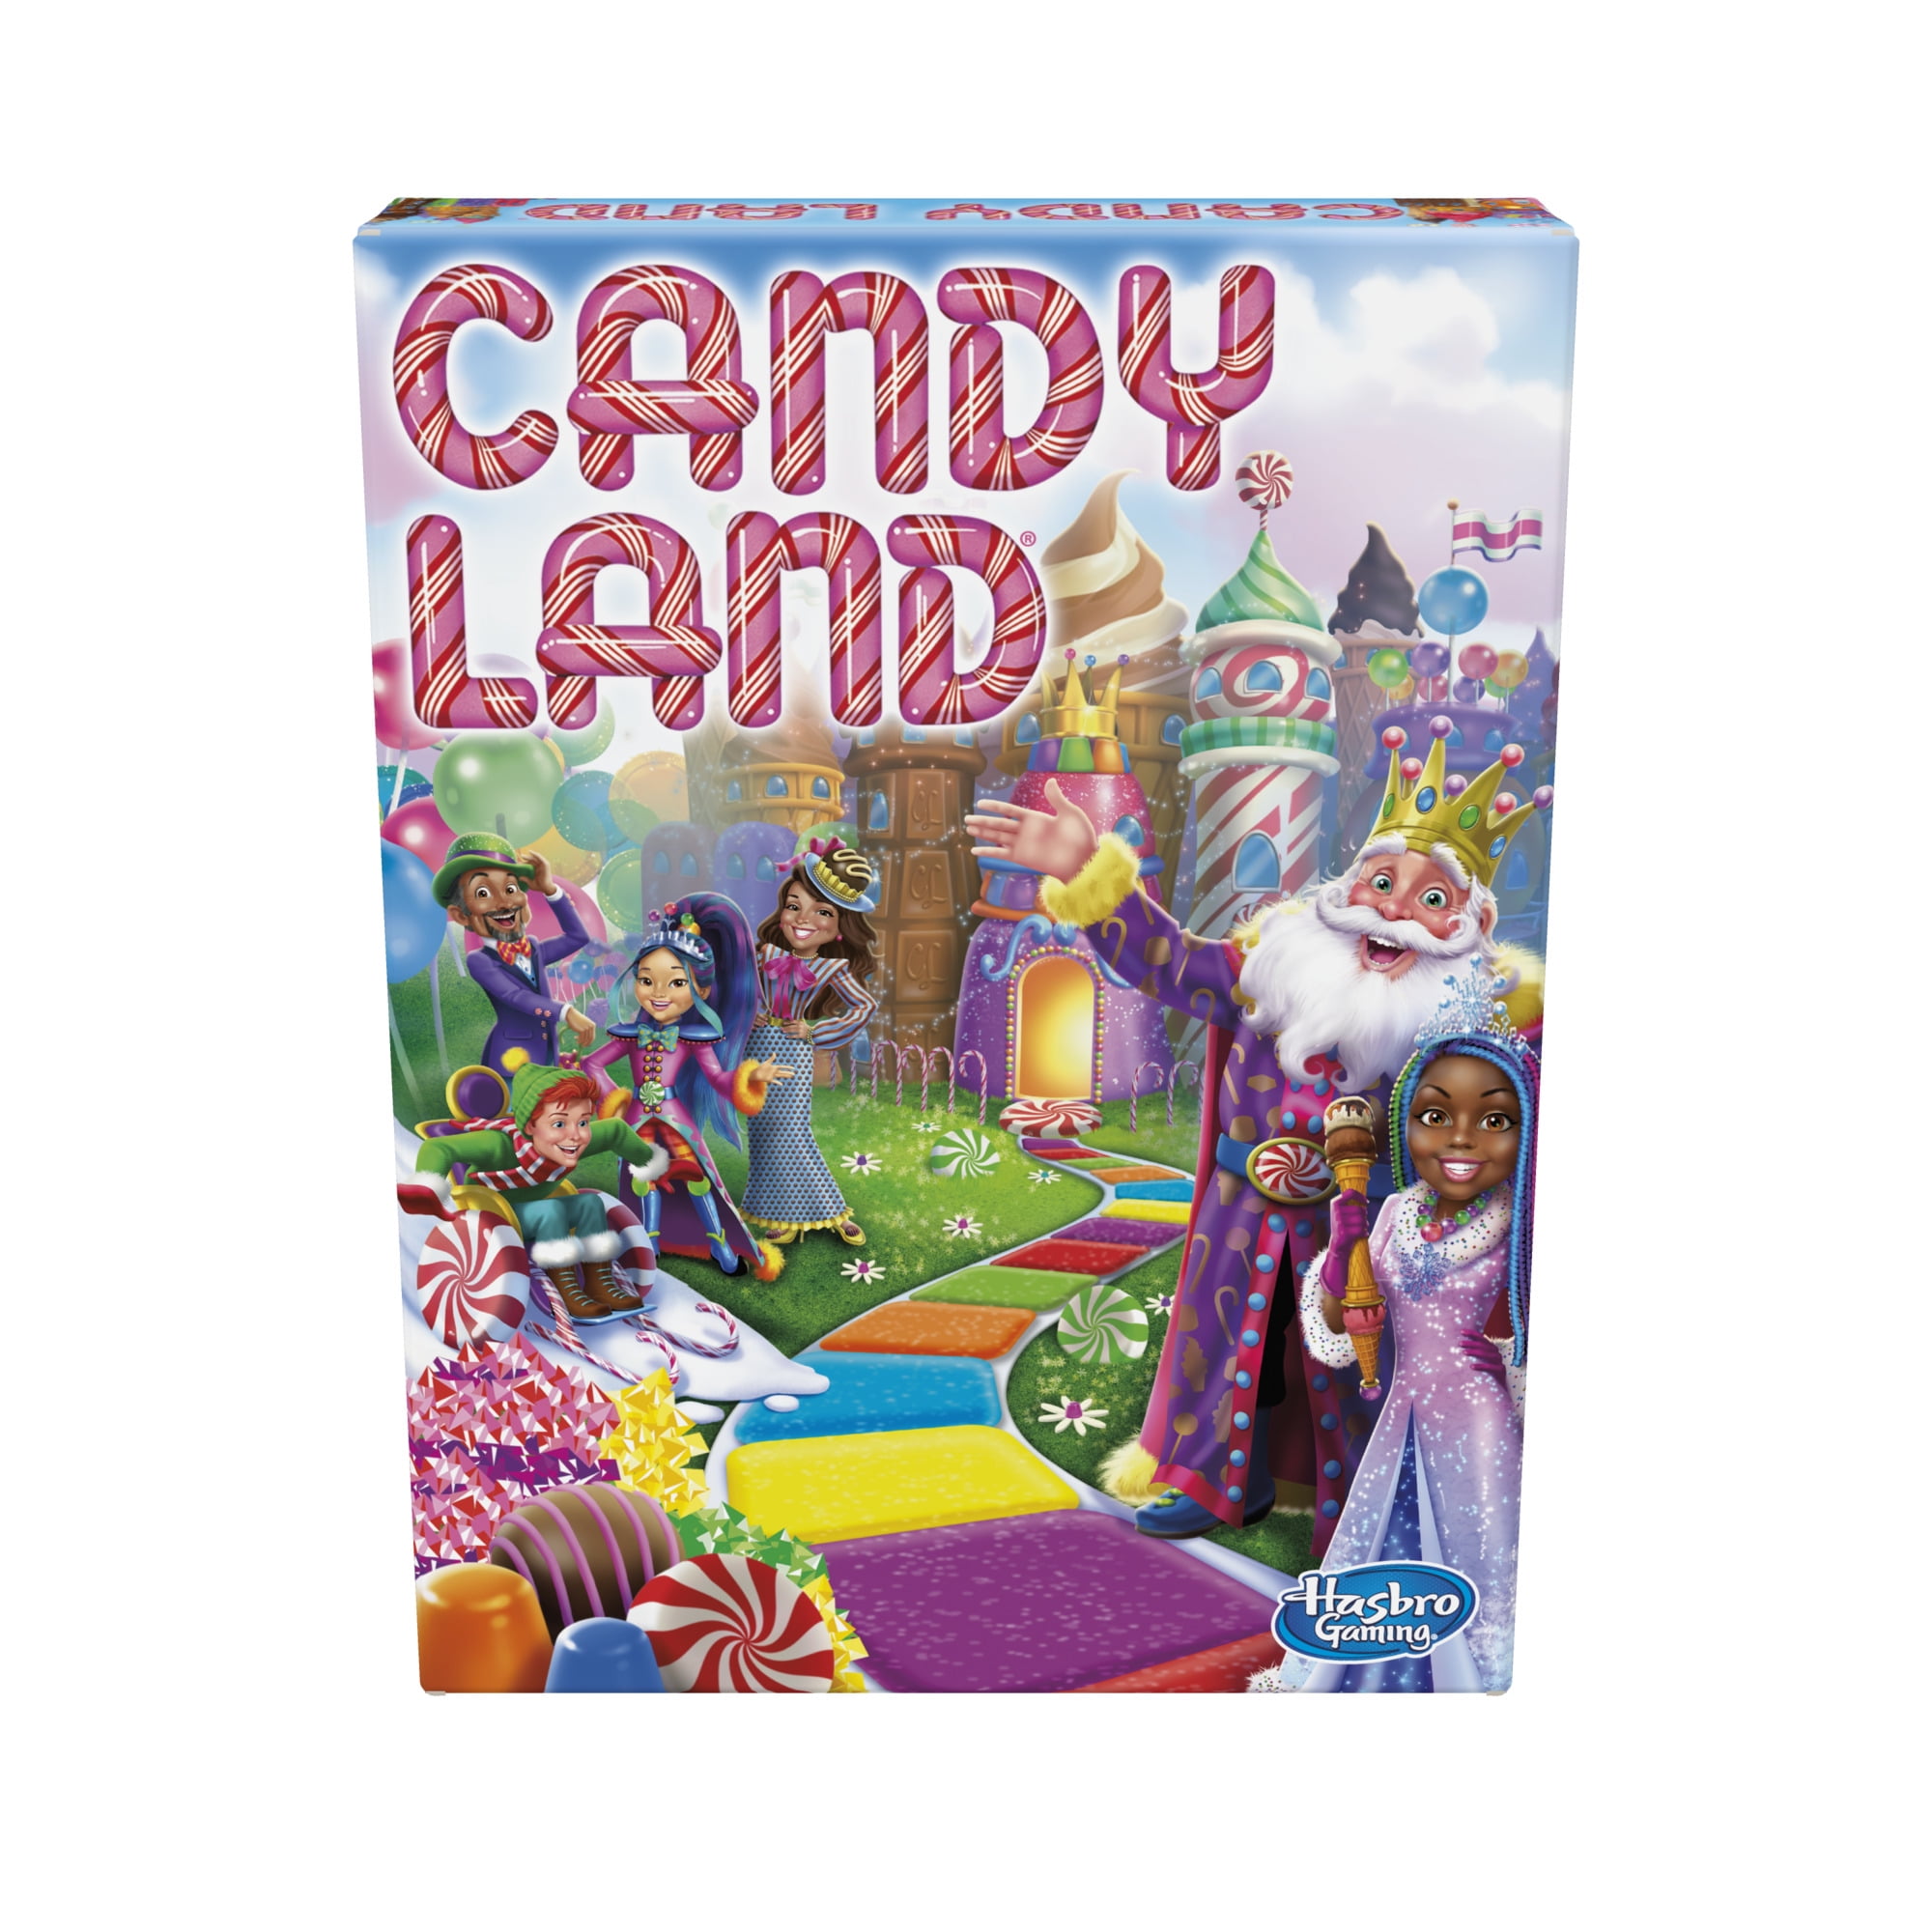 Candy land Used Very Good Board Game Hasbro Gaming Table Top Game 